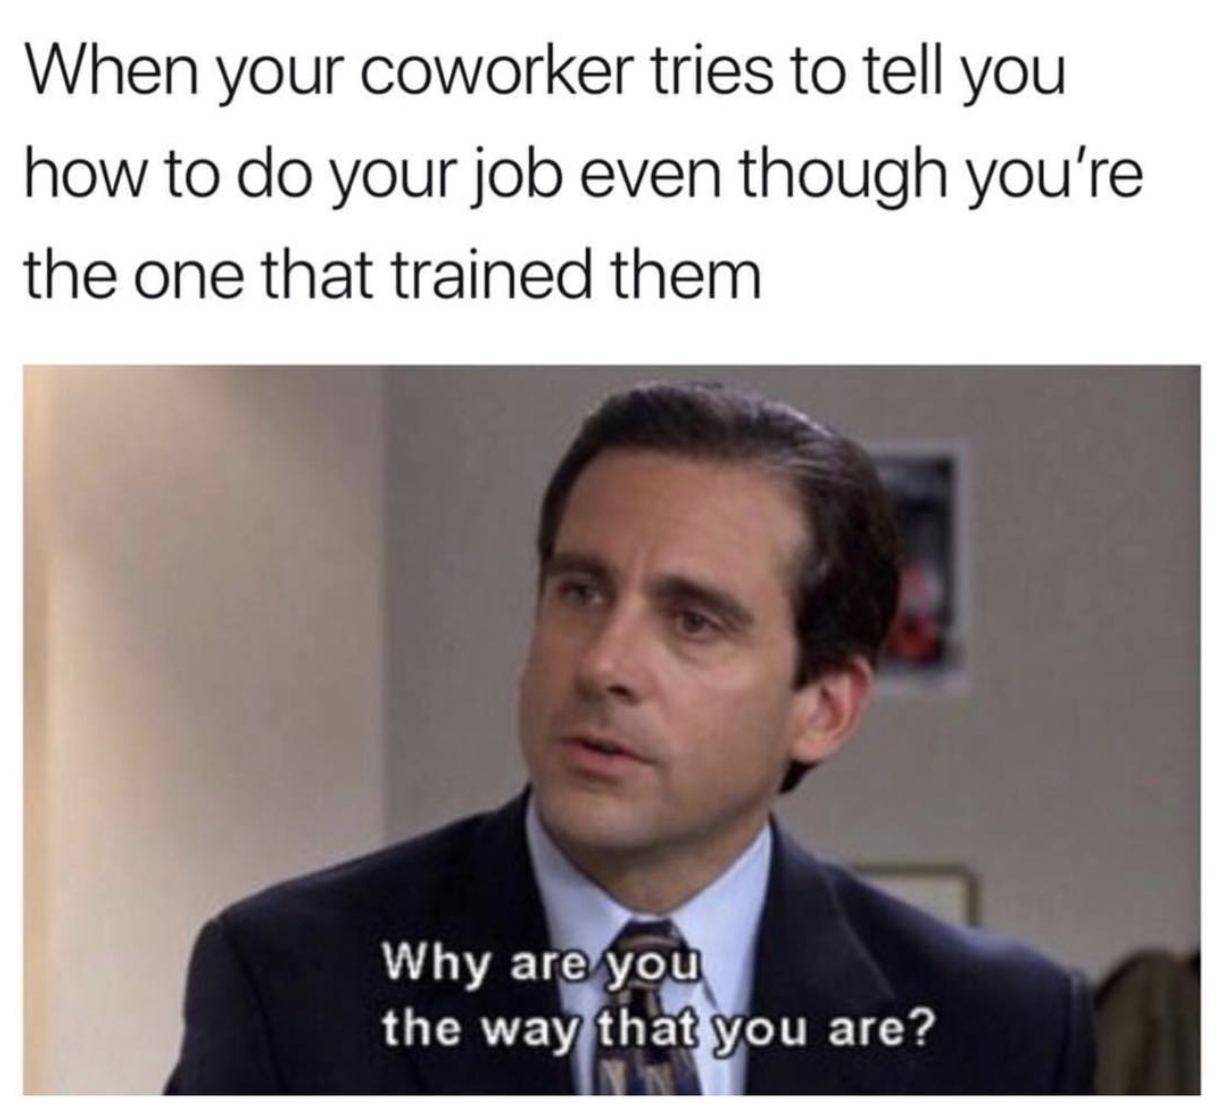 office memes - When your coworker tries to tell you how to do your job even though you're the one that trained them Why are you the way that you are?